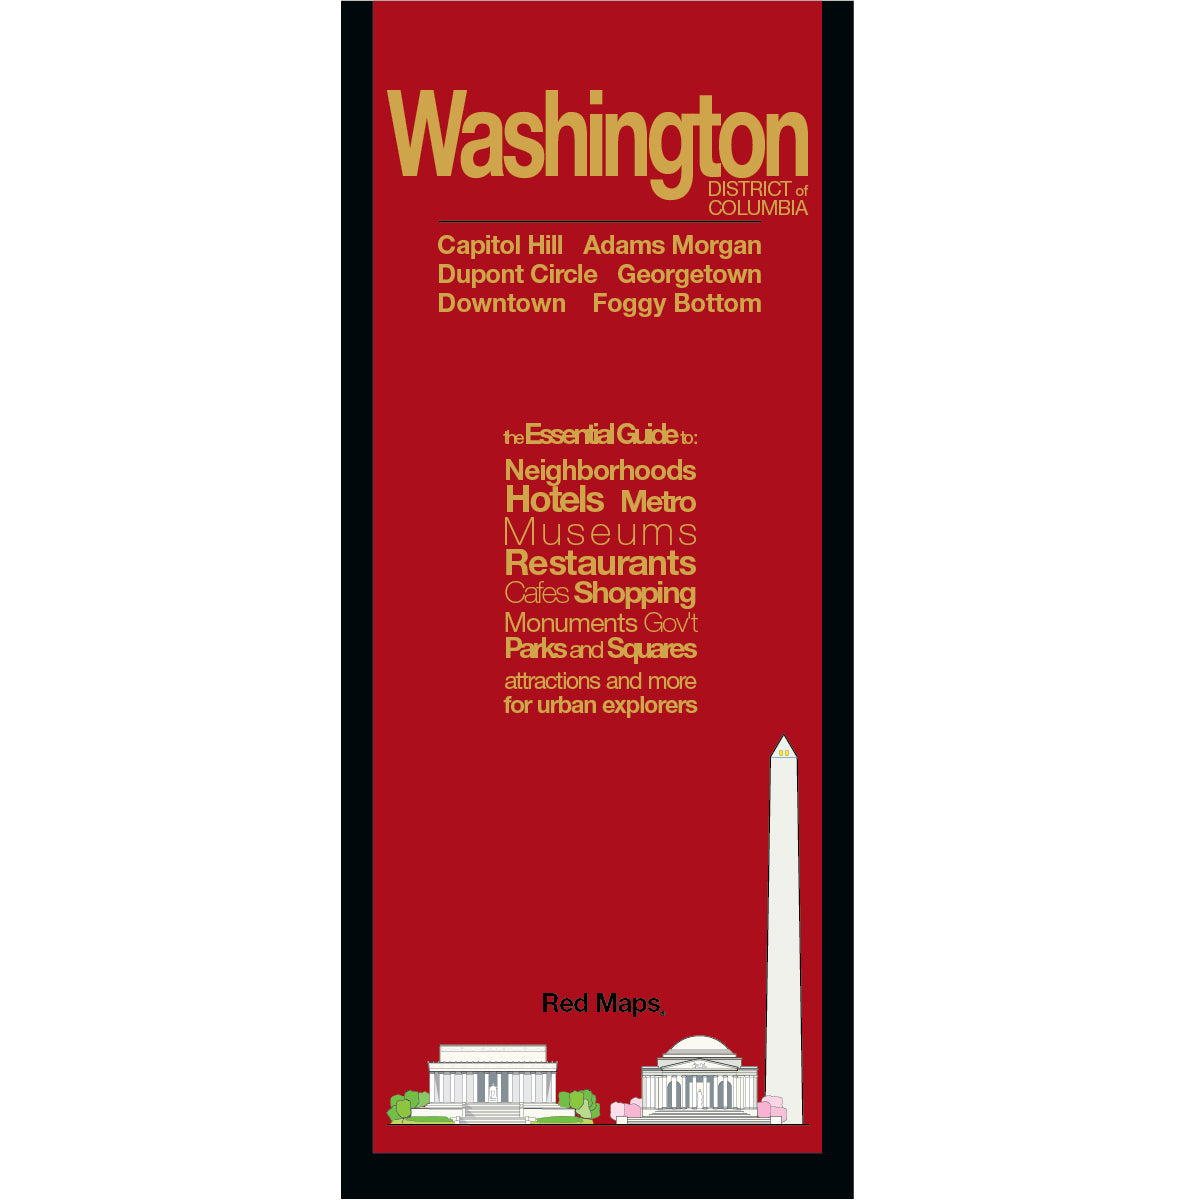 Washington DC foldout map with a red colored cover.